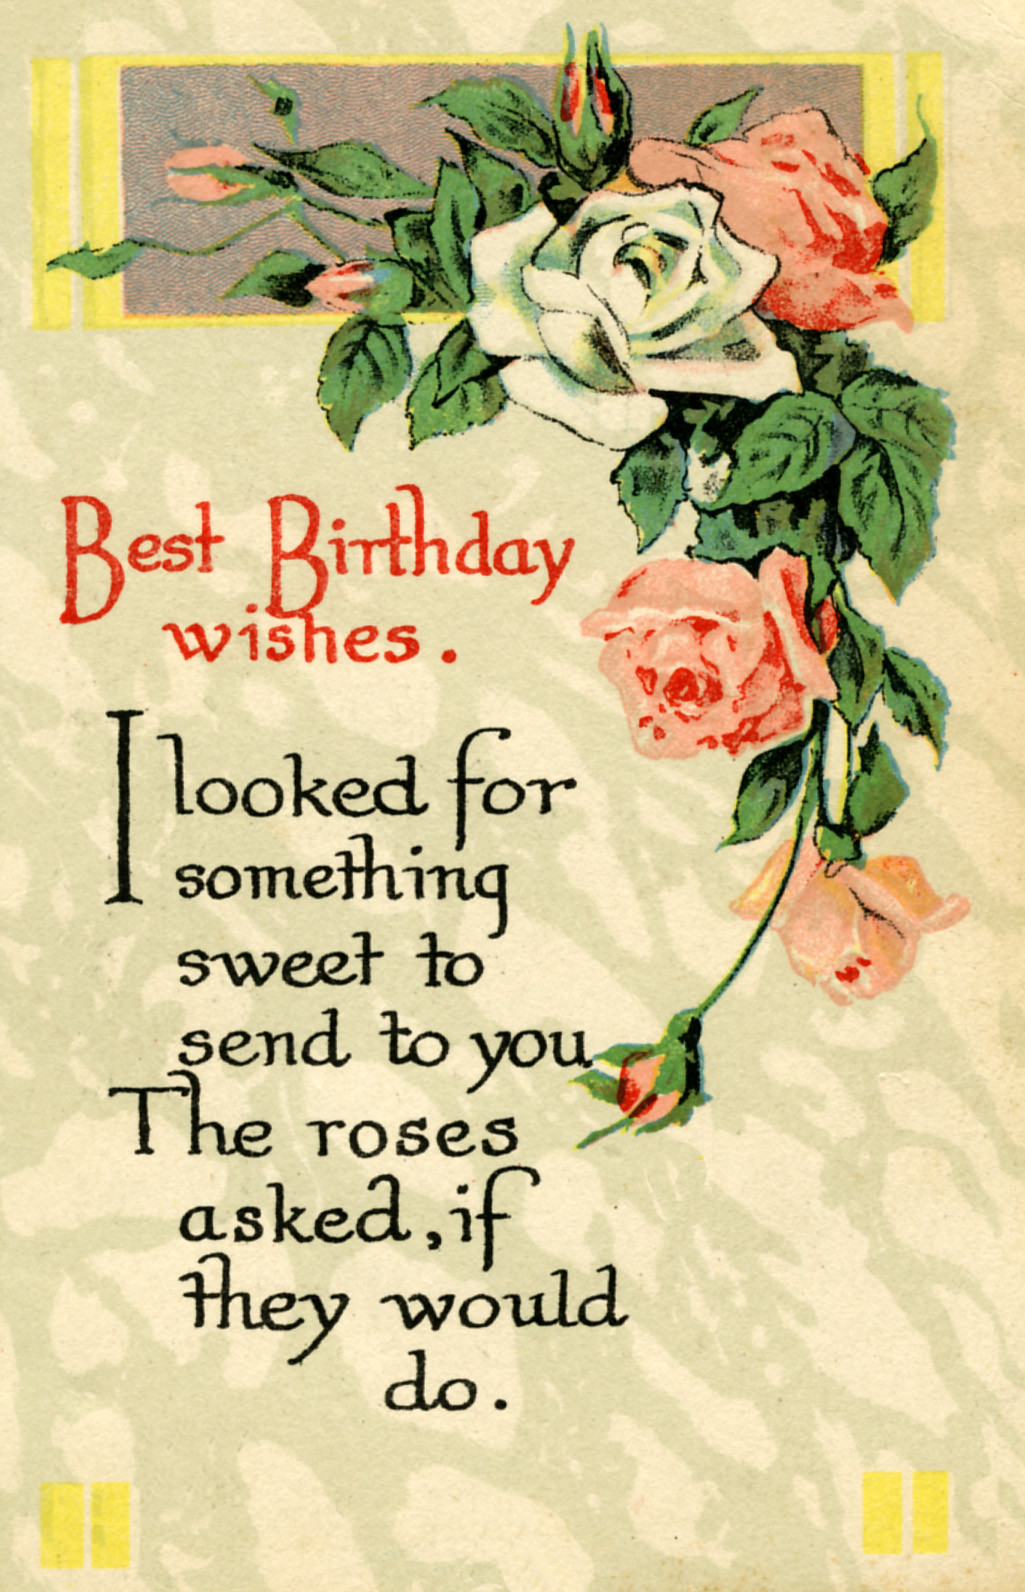 Happy Birthday Cards For A Friend
 Best Happy Birthday Wishes For Friends – Themes pany